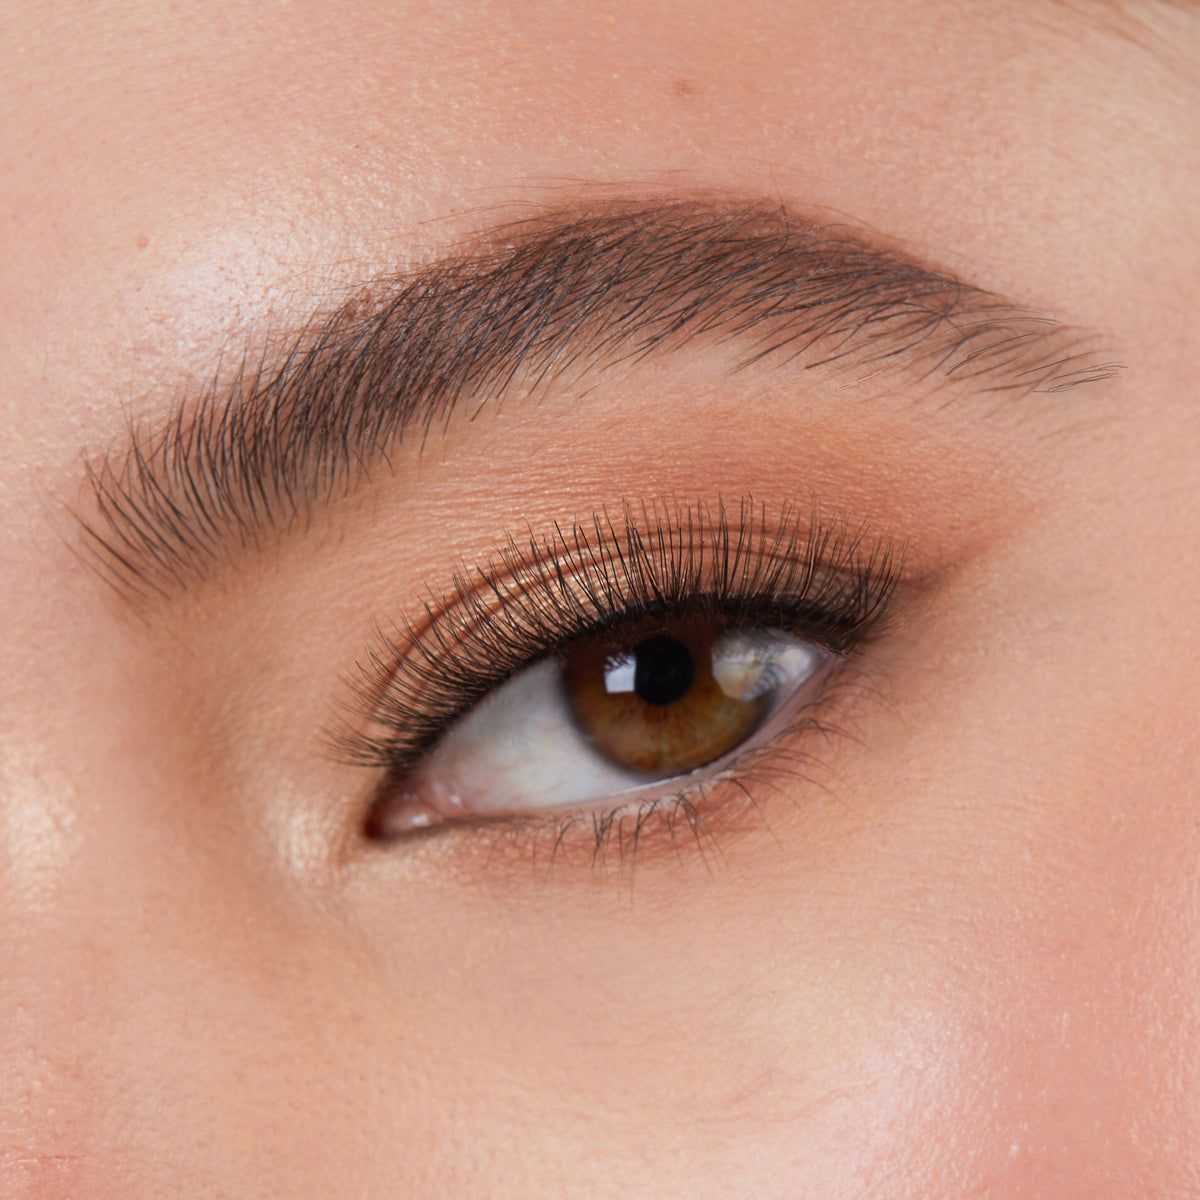 Lithe Lashes Core Collection lash style named 02 Everyday Round, a close up eye thumbnail image of the model's eye wearing the false lashes for an up close perspective on how elegant the falsies look on the eye.